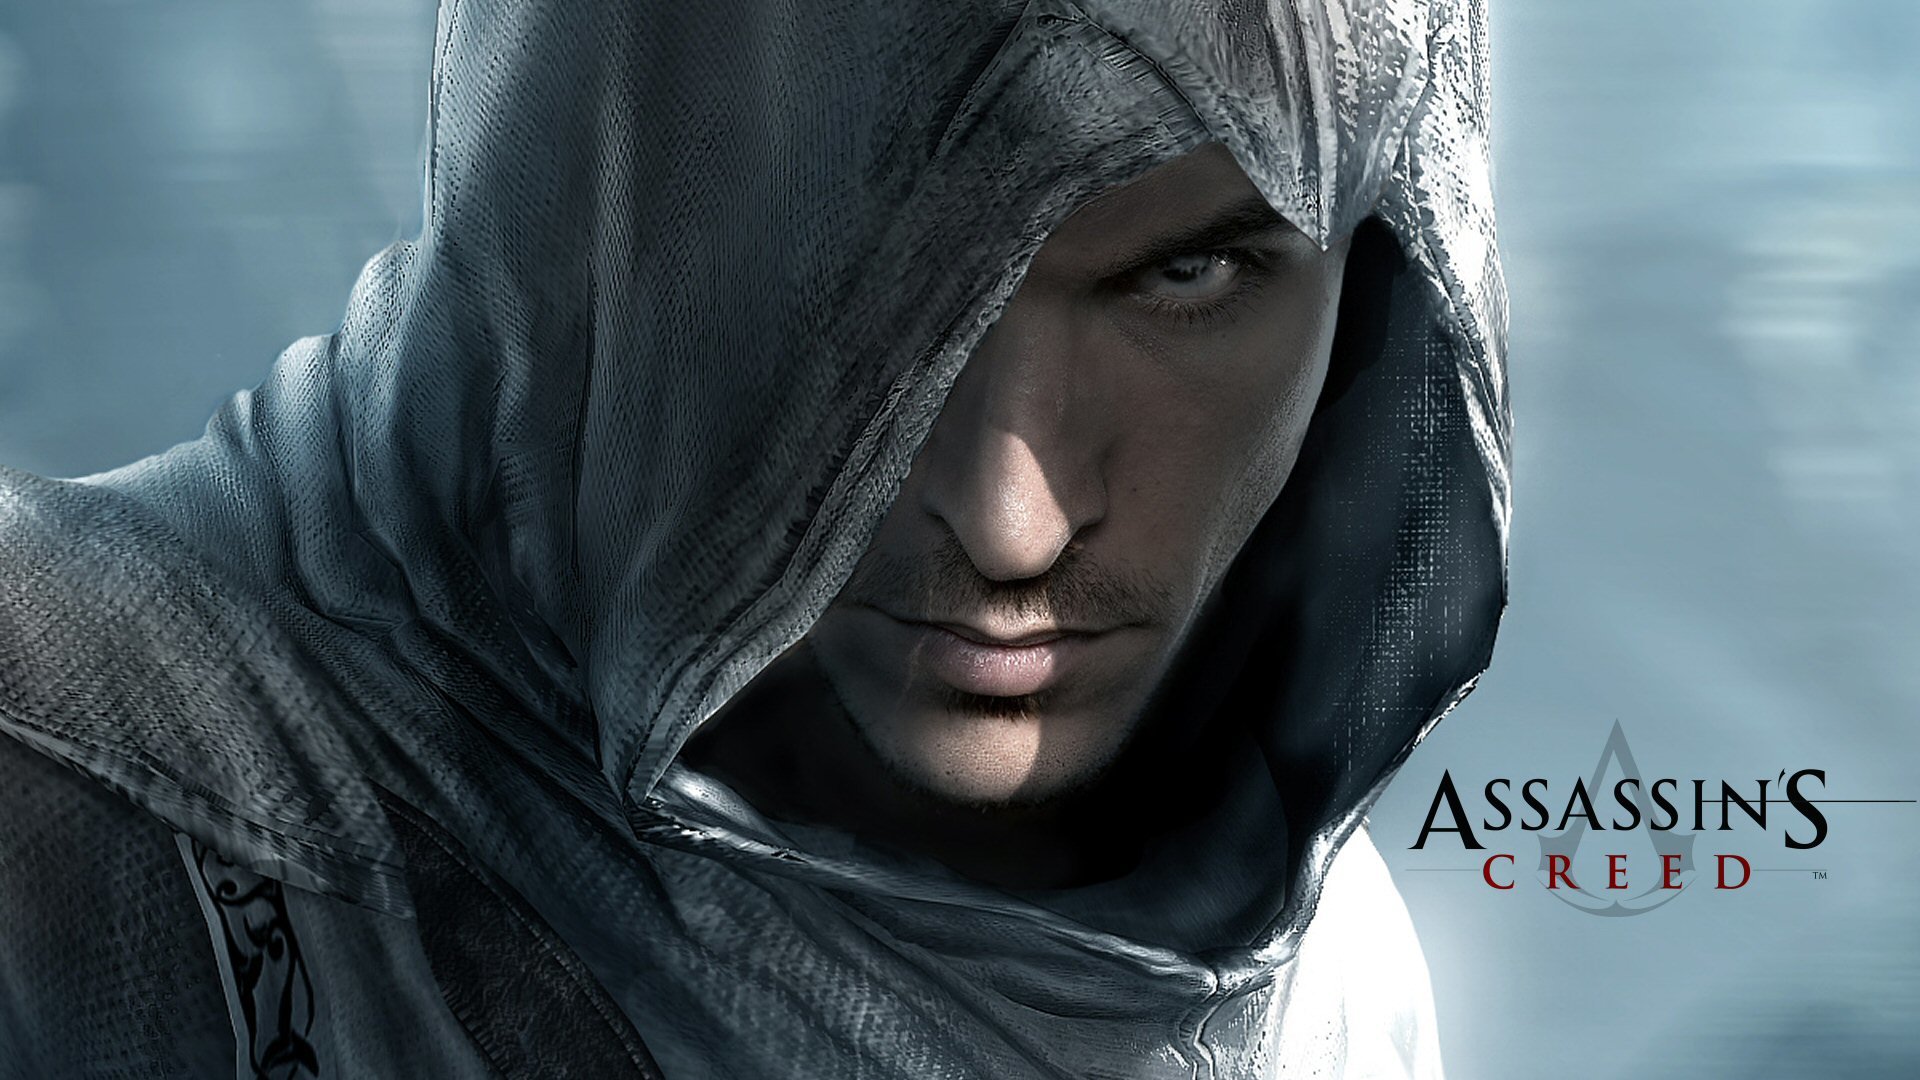 Download full hd Assassin's Creed desktop background ID:188259 for free